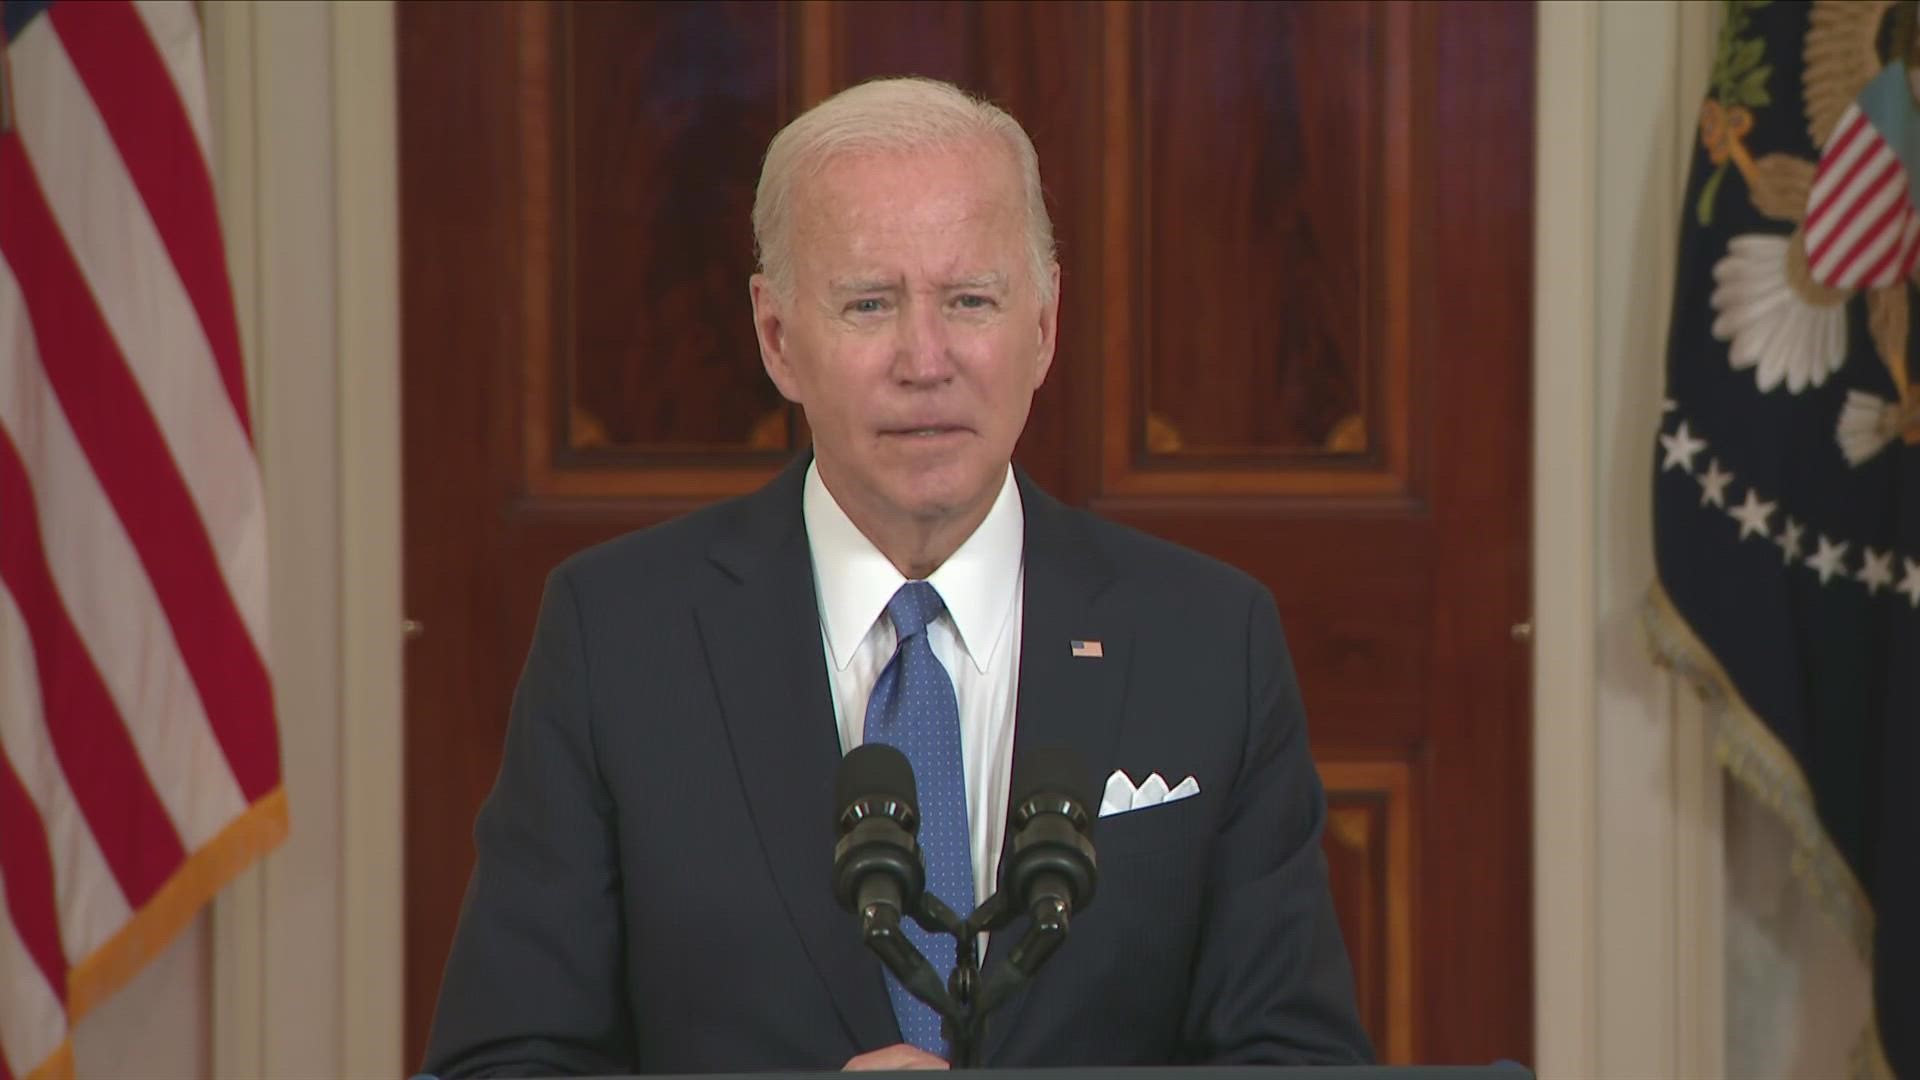 President Joe Biden pleaded with voters to elect both state and federal representatives that will work to ensure women have safe access to abortion services.